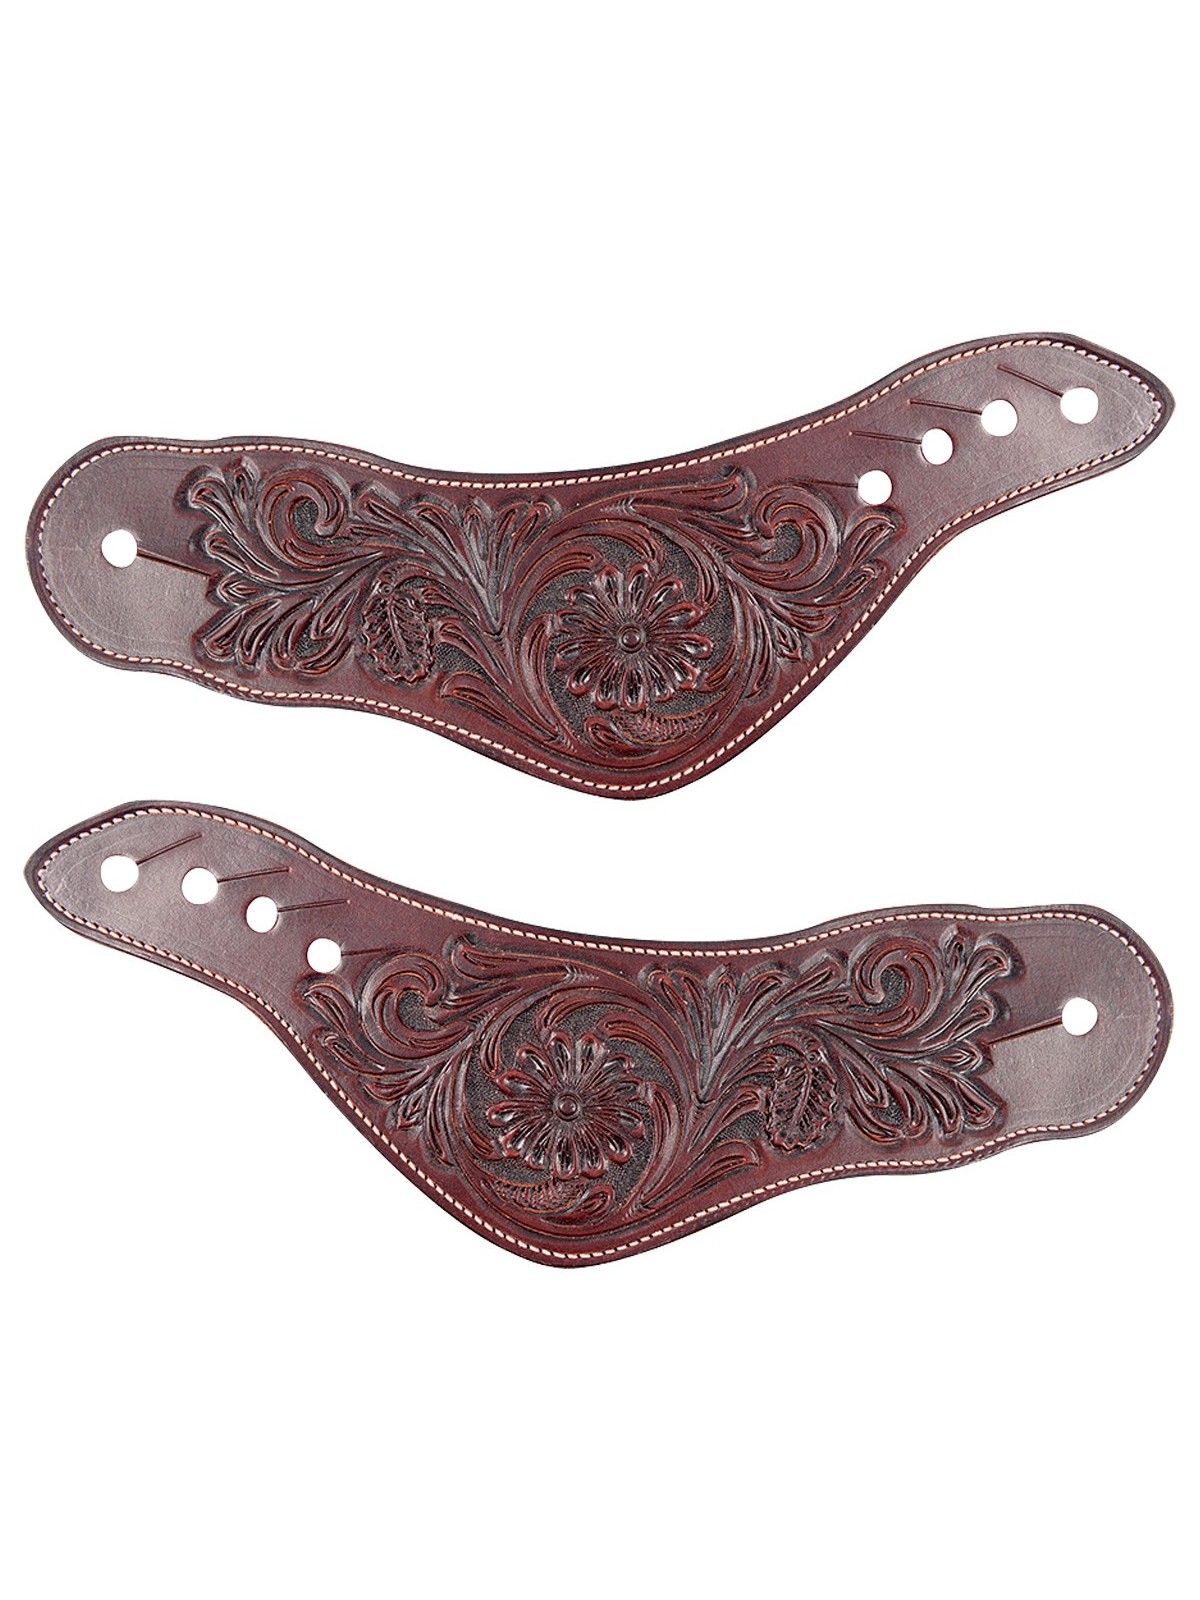 Martin Saddlery Mens' Dove Wing Mountain Daisy Spur Straps SSDWCHMD